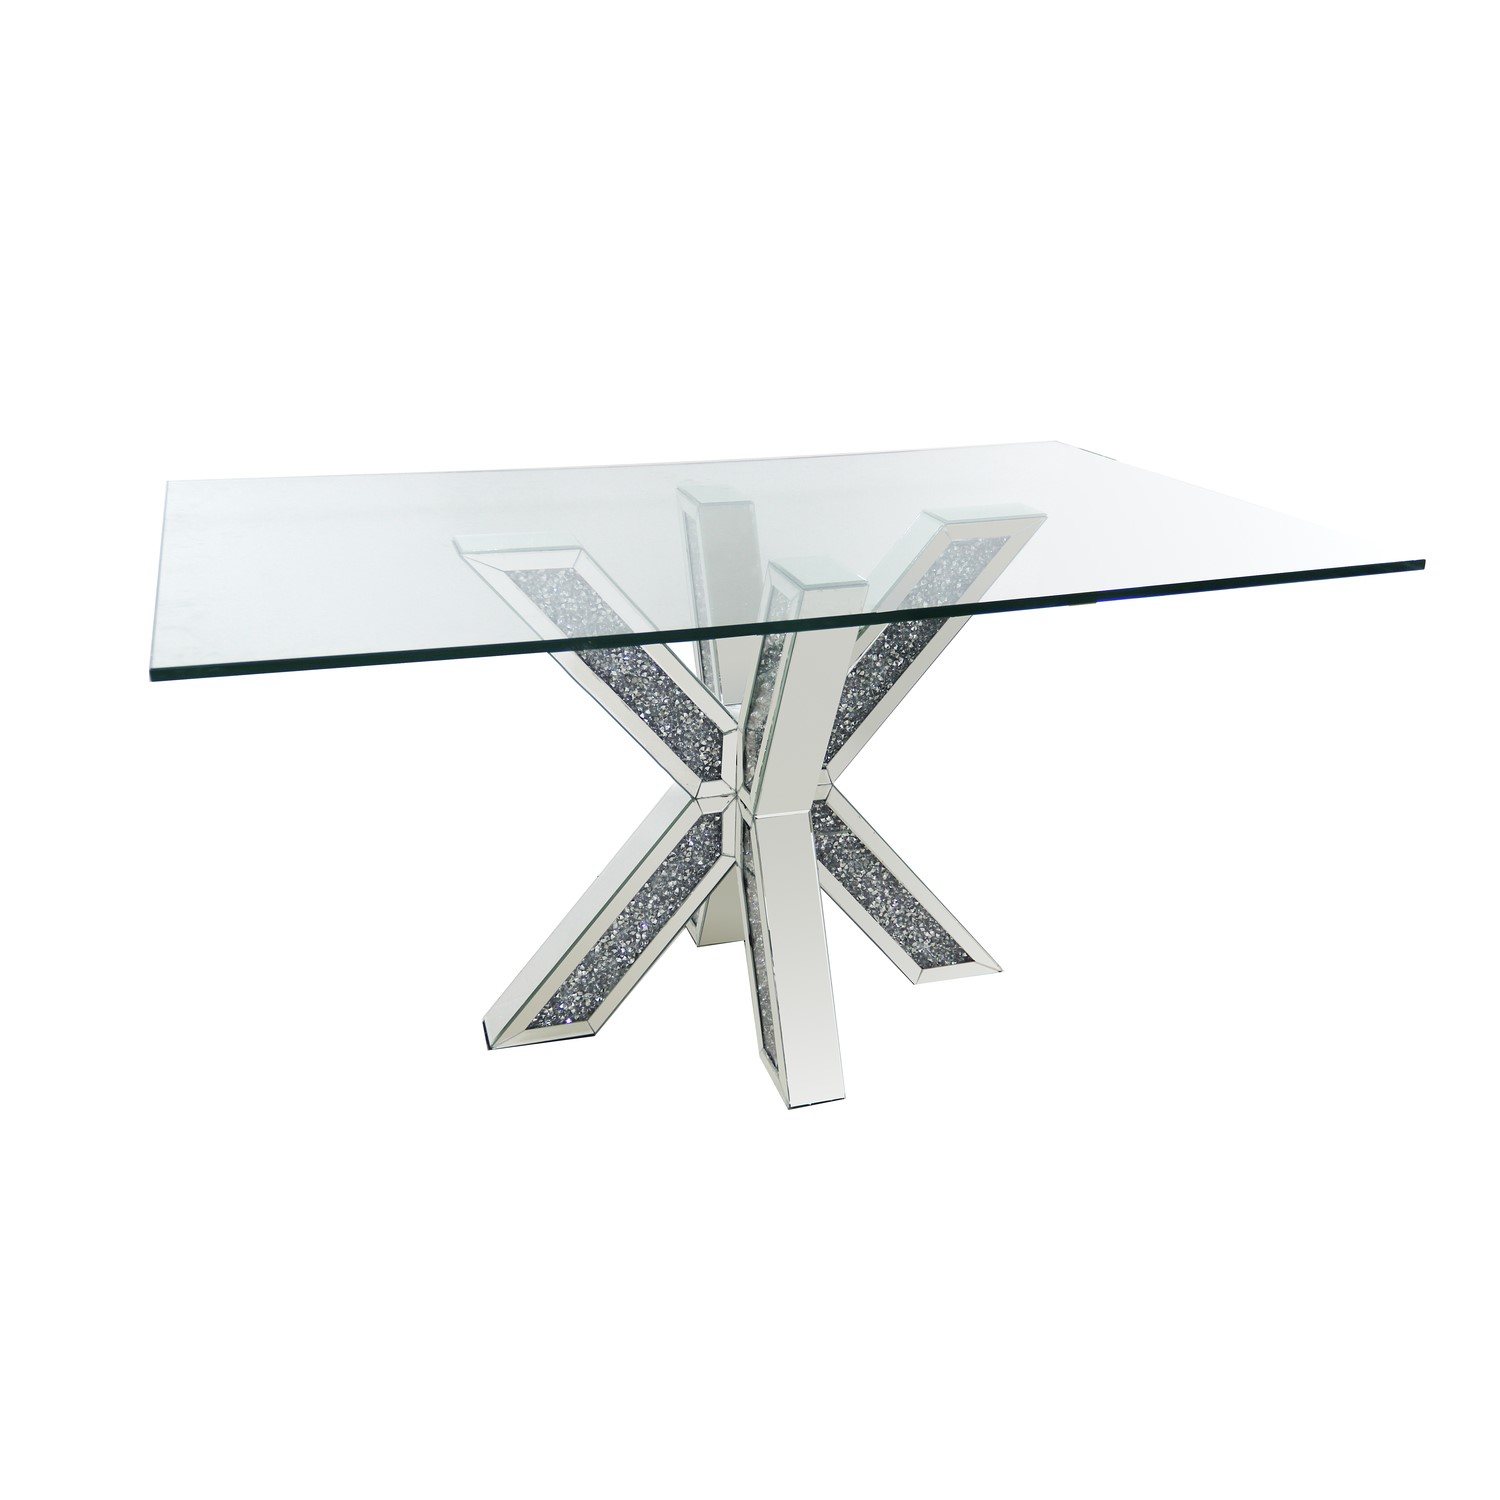 Photo of Rectangle glass top dining table - seats 6 - jade boutique